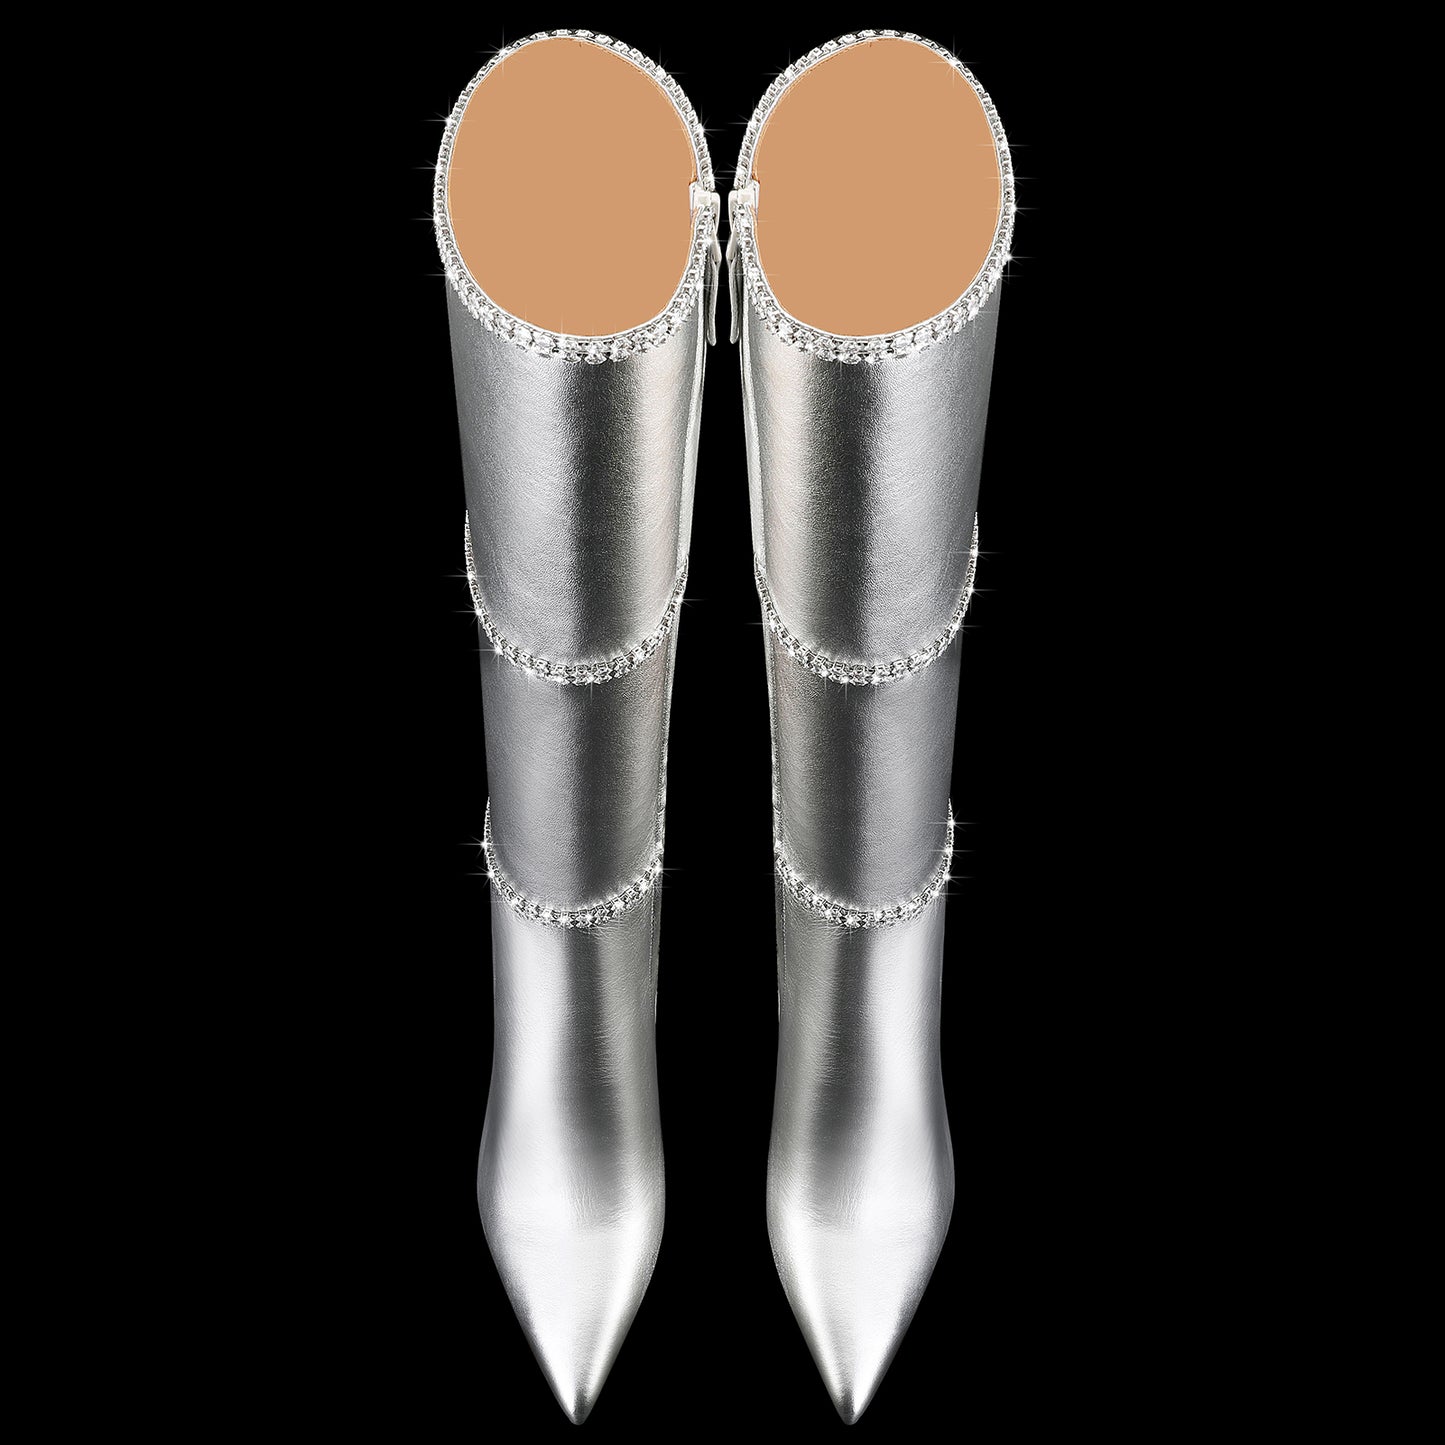 High Heel Knee Leather Boots, Sexy Pointed Toe Stilettos